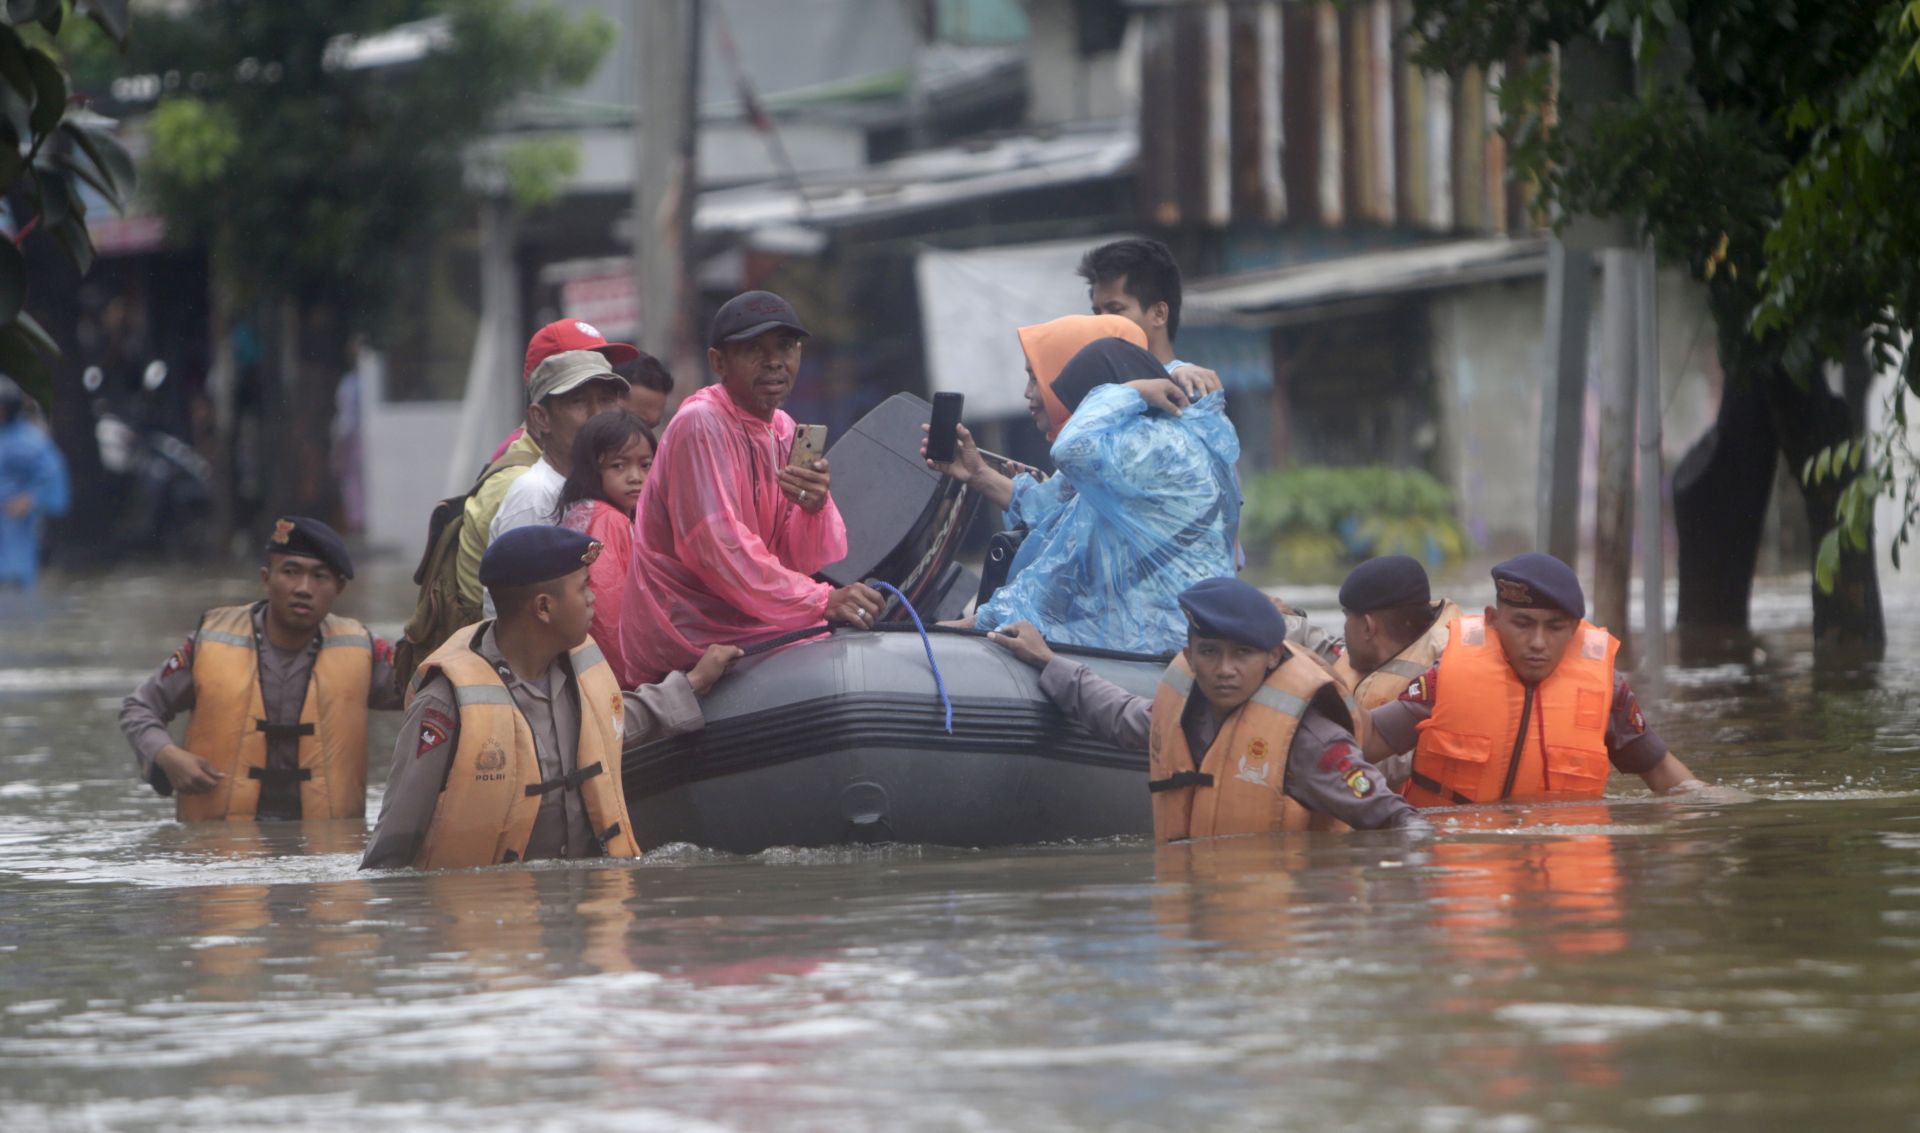 epa08097177 Indonesian police pull a rubber dinghy as they evacuate residents in Jakarta, Indonesia, 01 January 2020. Overnight heavy rains triggered widespread flooding in Jakarta and surrounding areas, bringing traffic to a standstill.  EPA/ADI WEDA